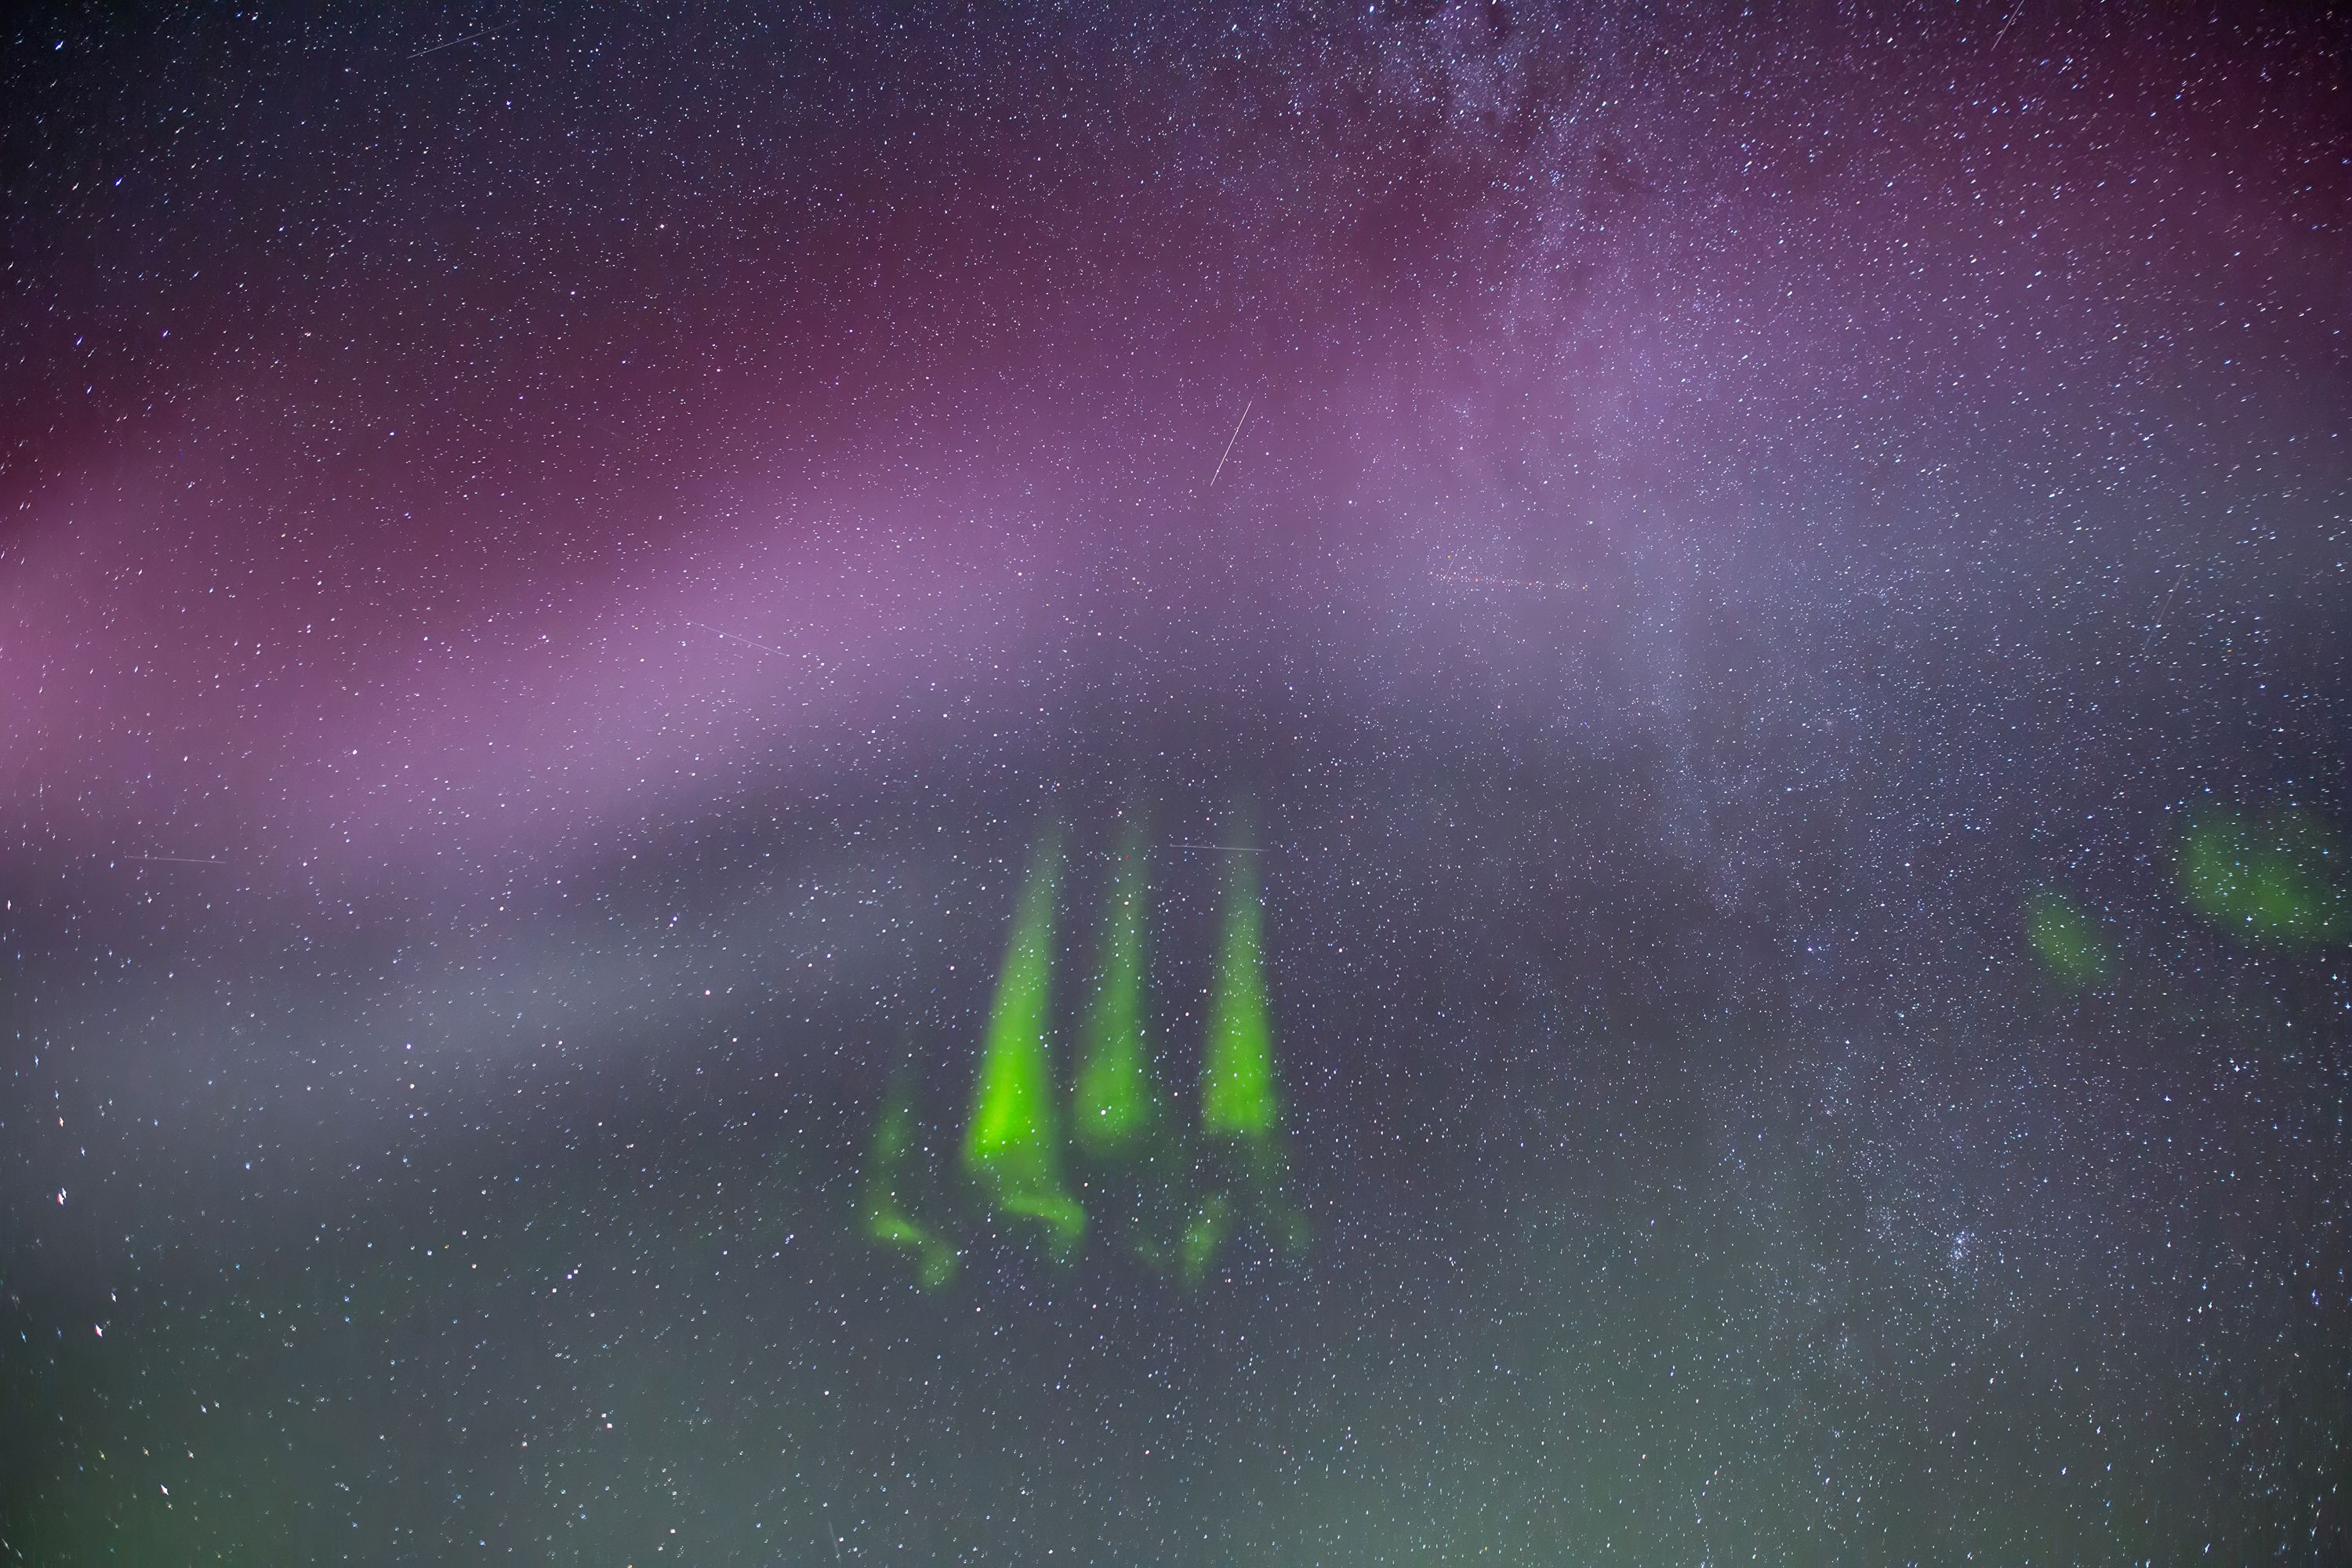 Steve: The aurora-like light show you can help research